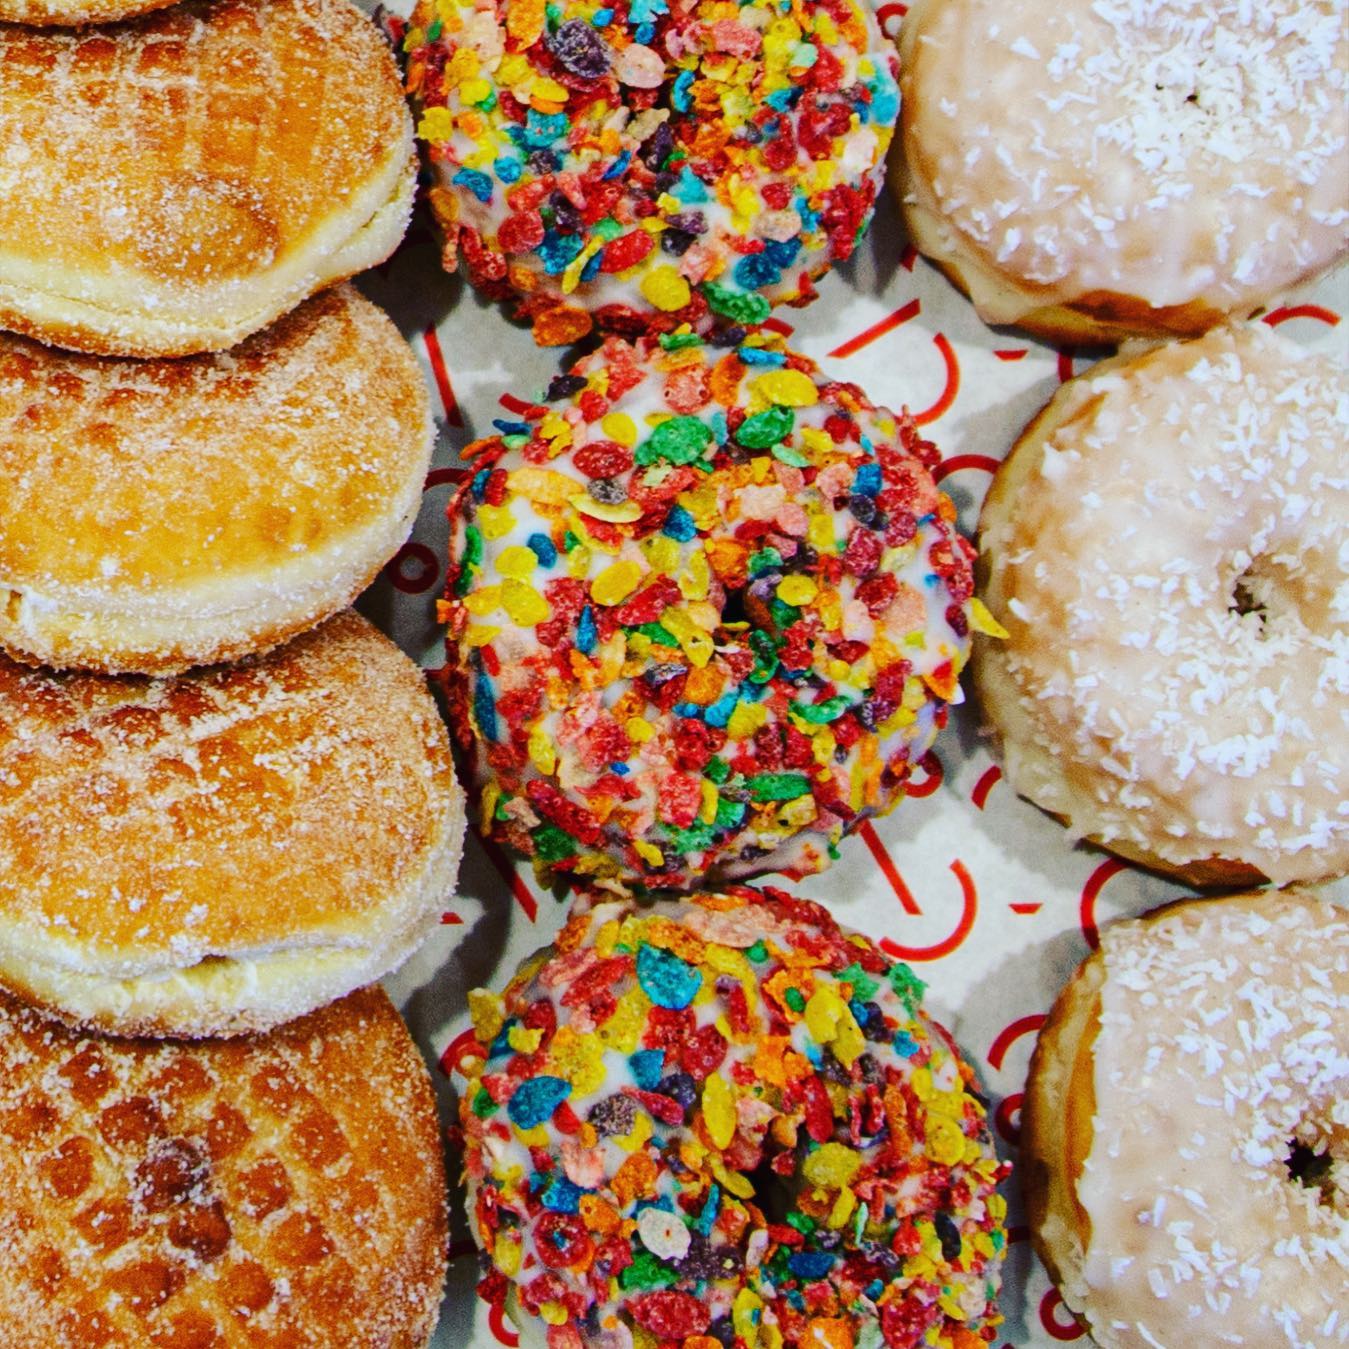 Three rows of jelly-filled, Fruity Pebbles, and frosted doughnuts from Hero Doughnuts